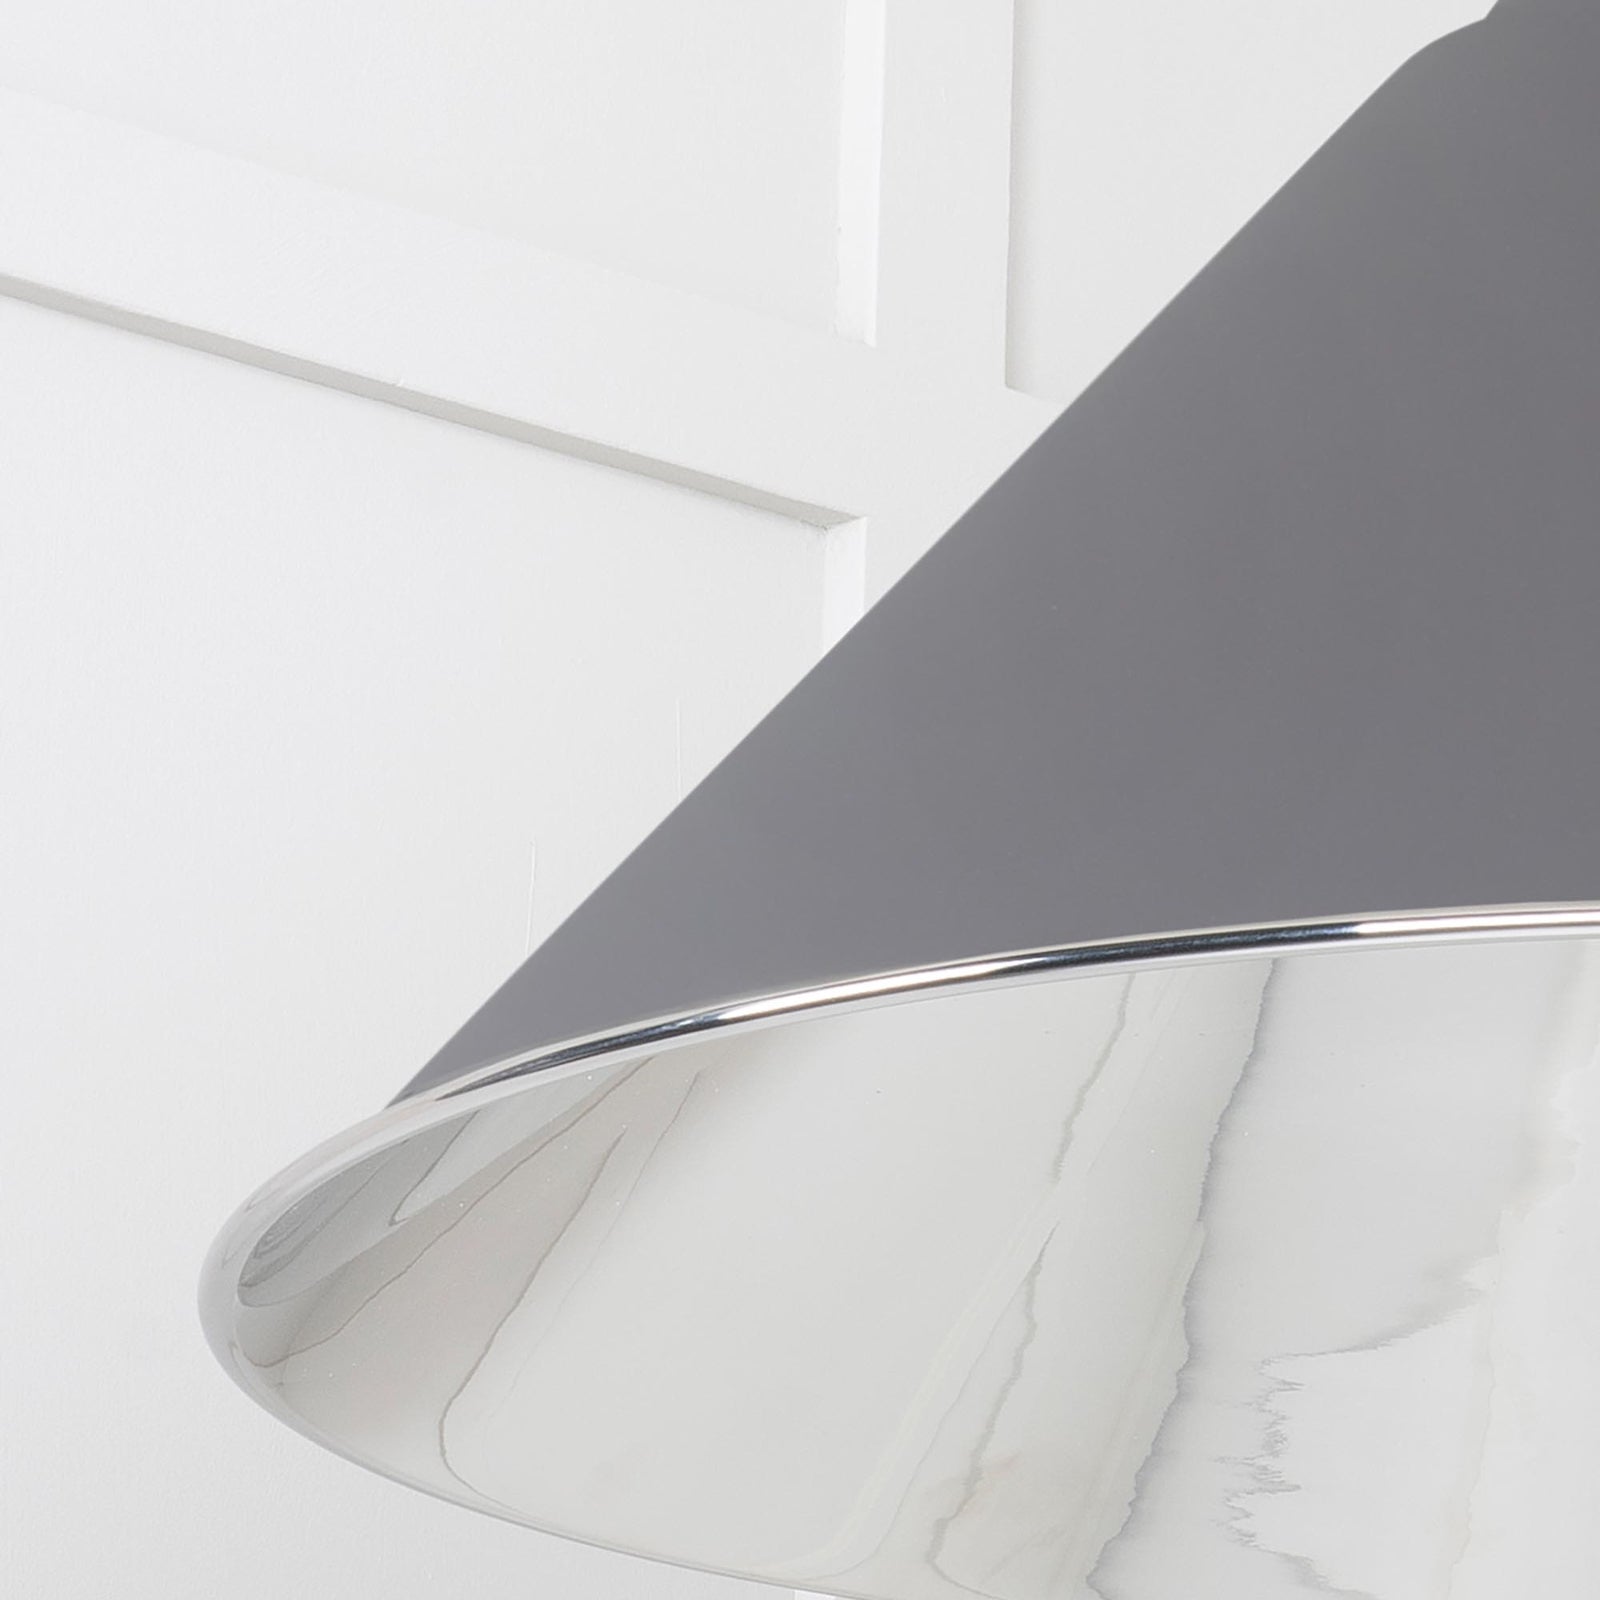 SHOW Close Up Image of Hockley Ceiling Light in Bluff in Smooth Nickel